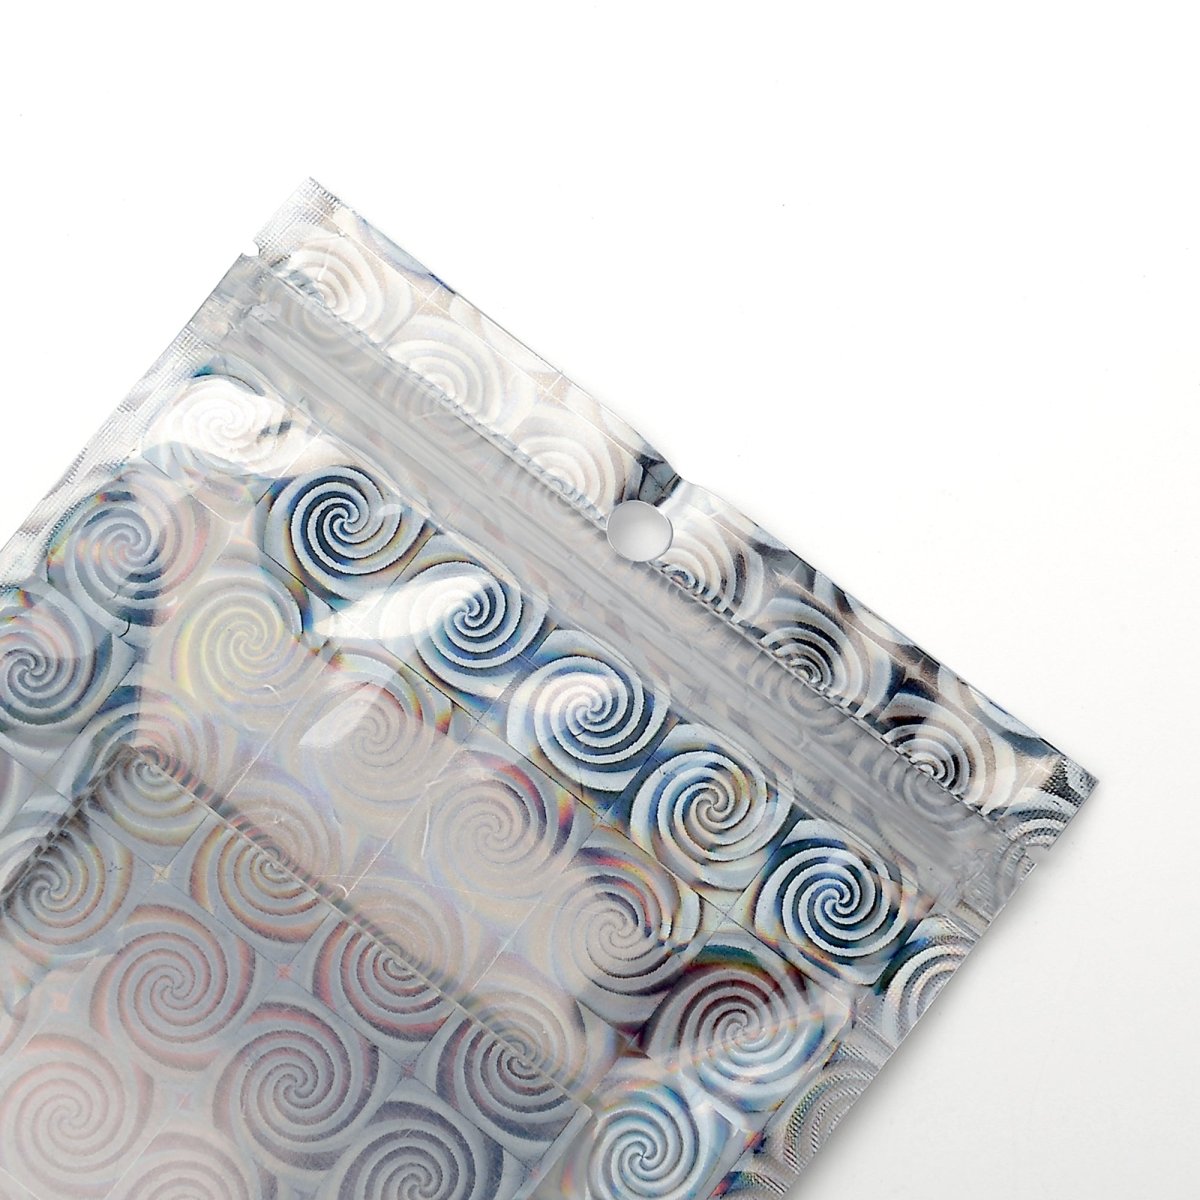 Clear and Half Diamond Holographic Swirl Mylar Flat Bags with Hang Hole - Katady packaging